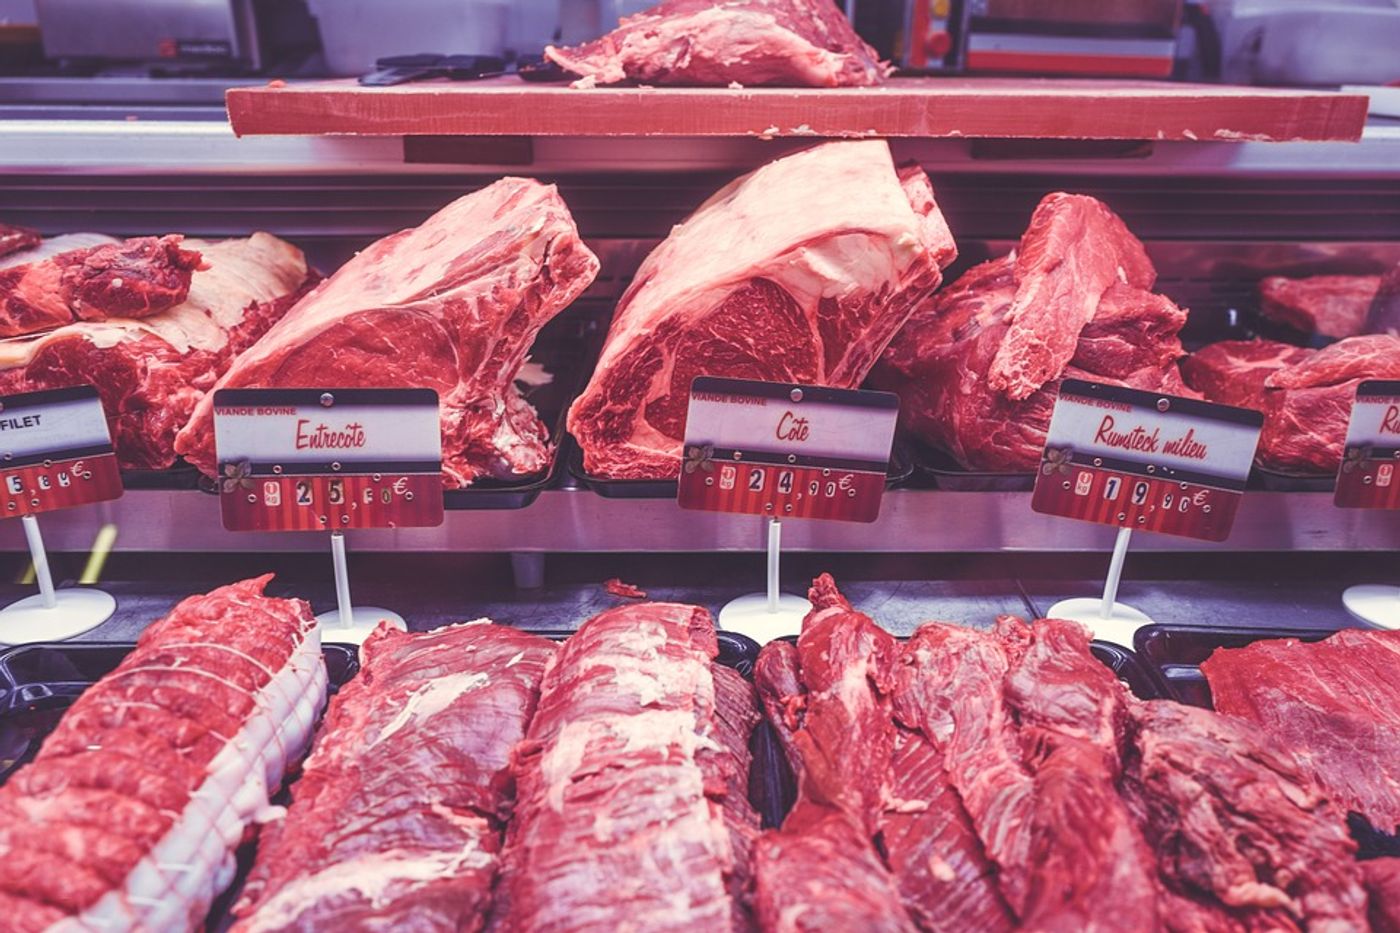 Allergy to red meat may be an underrecognized factor in heart disease.